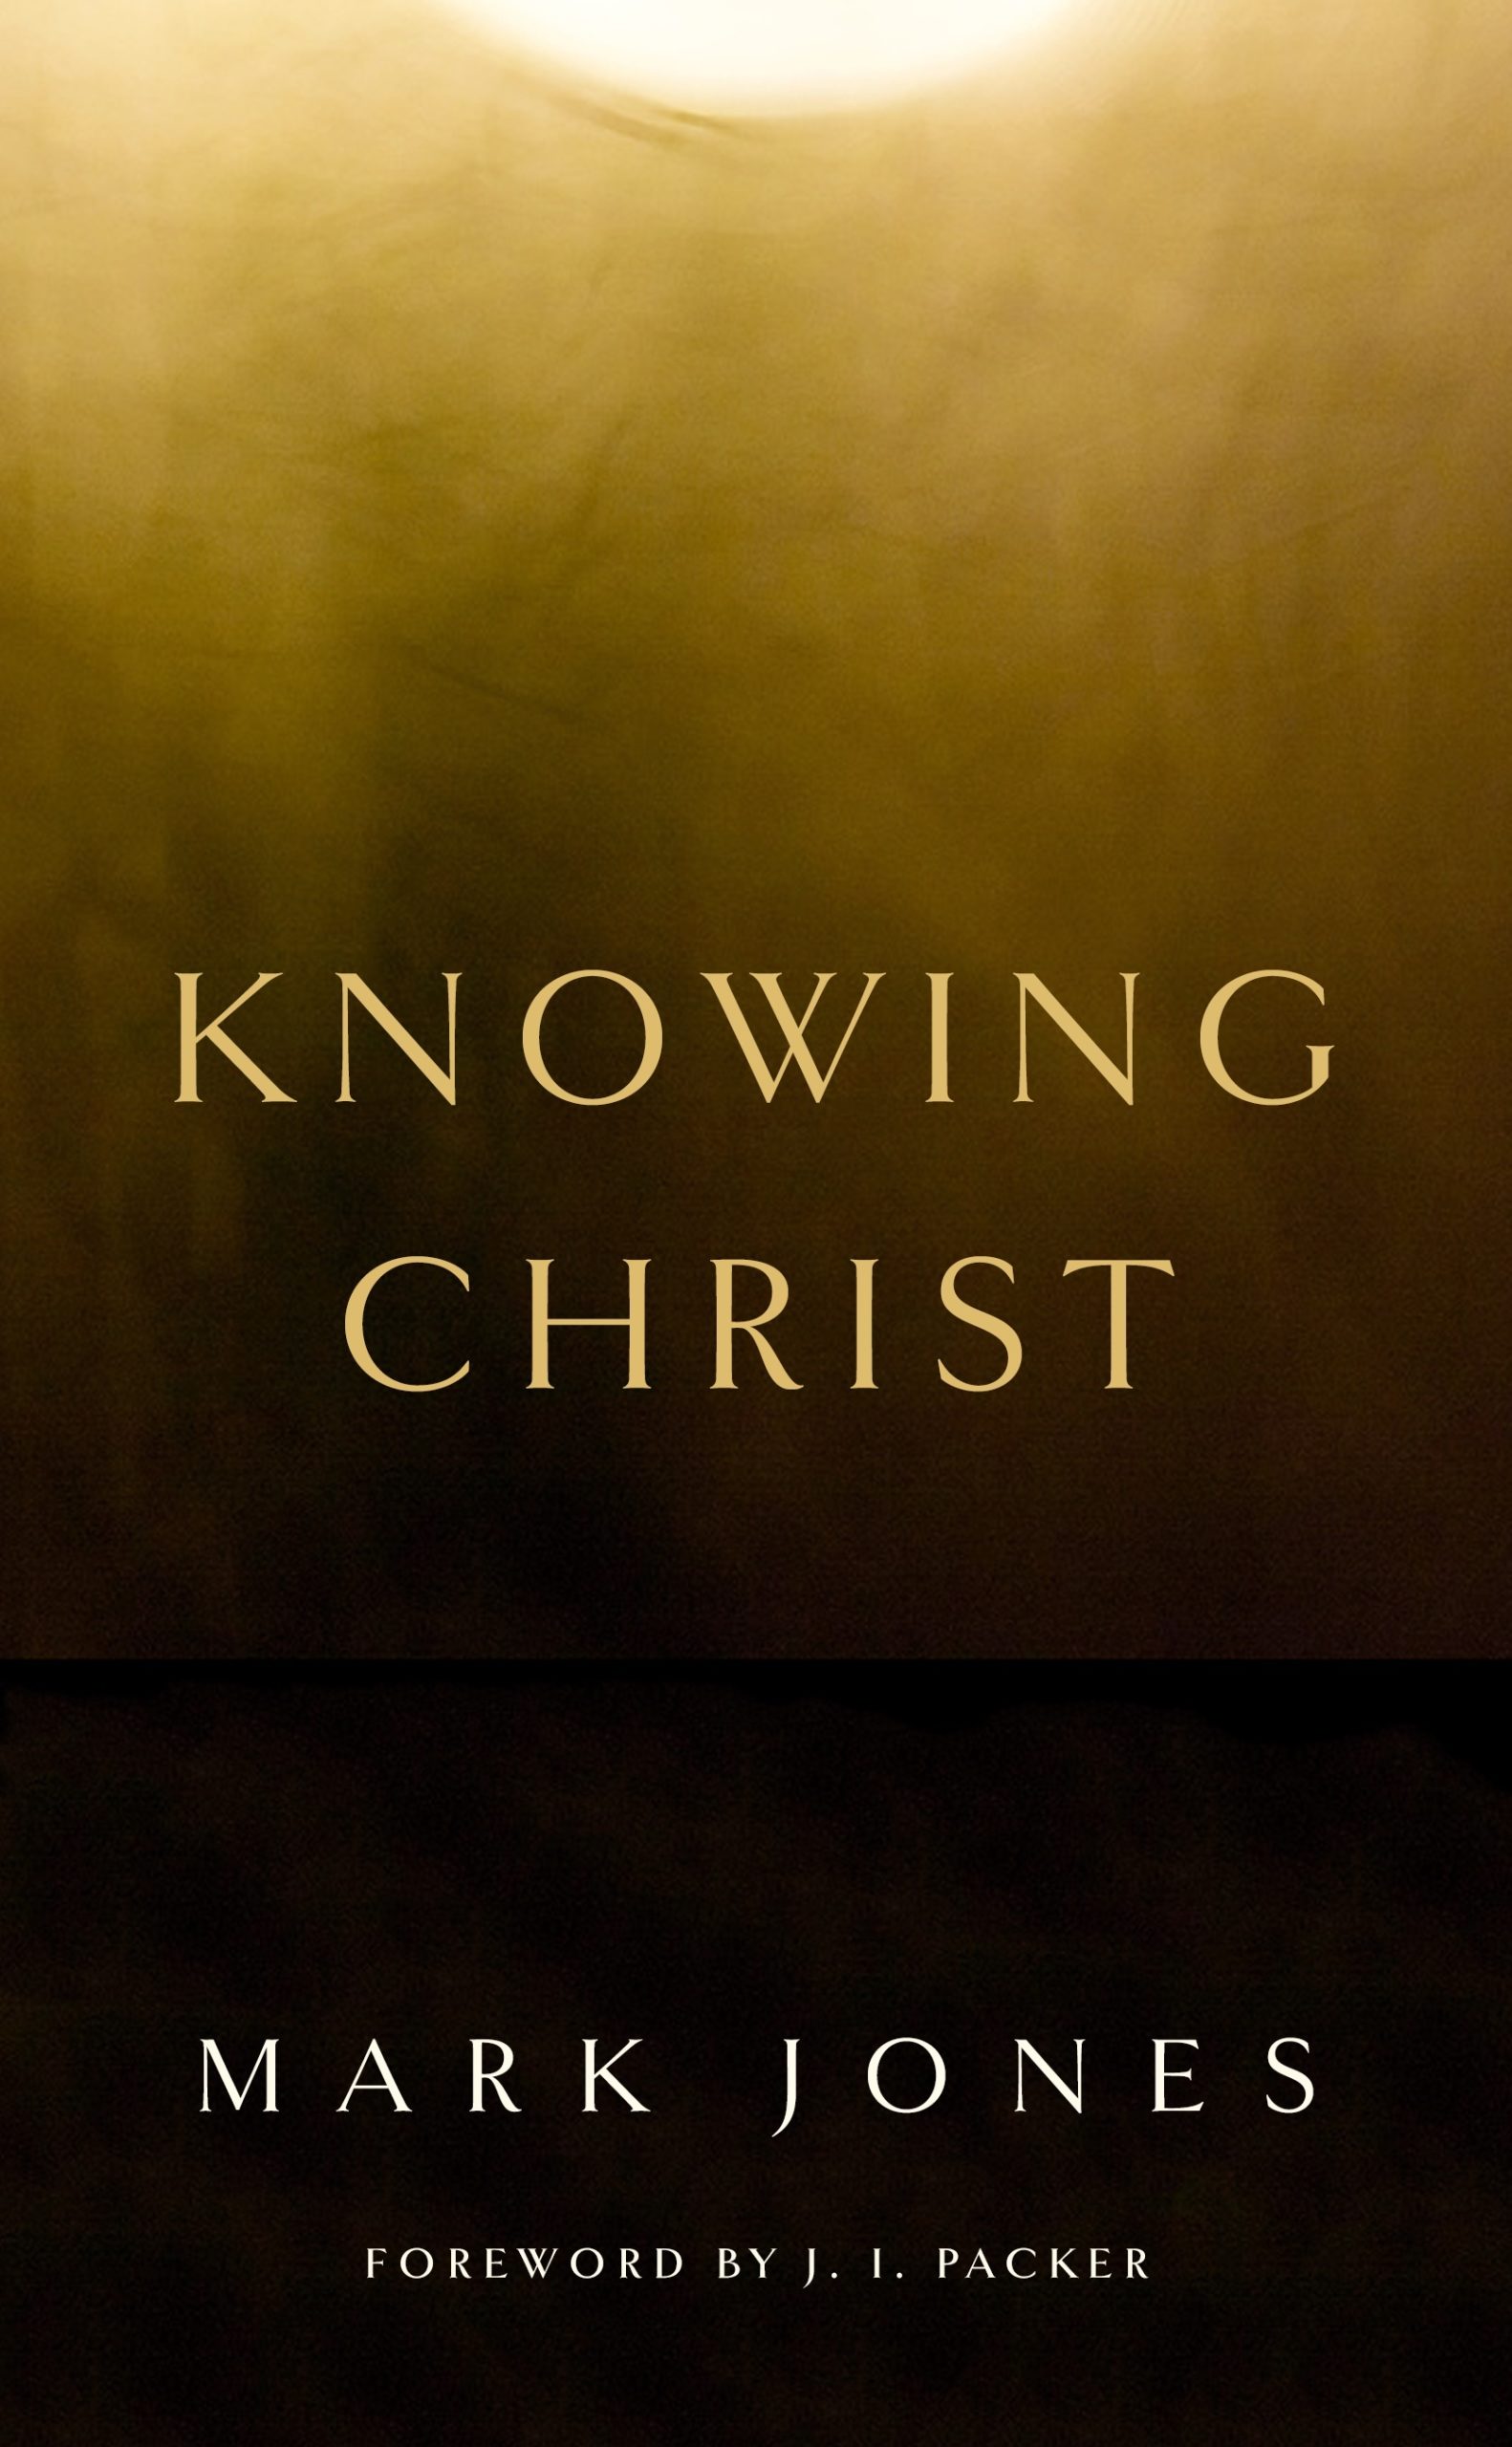 cover image for 'Knowing Christ' by Mark Jones